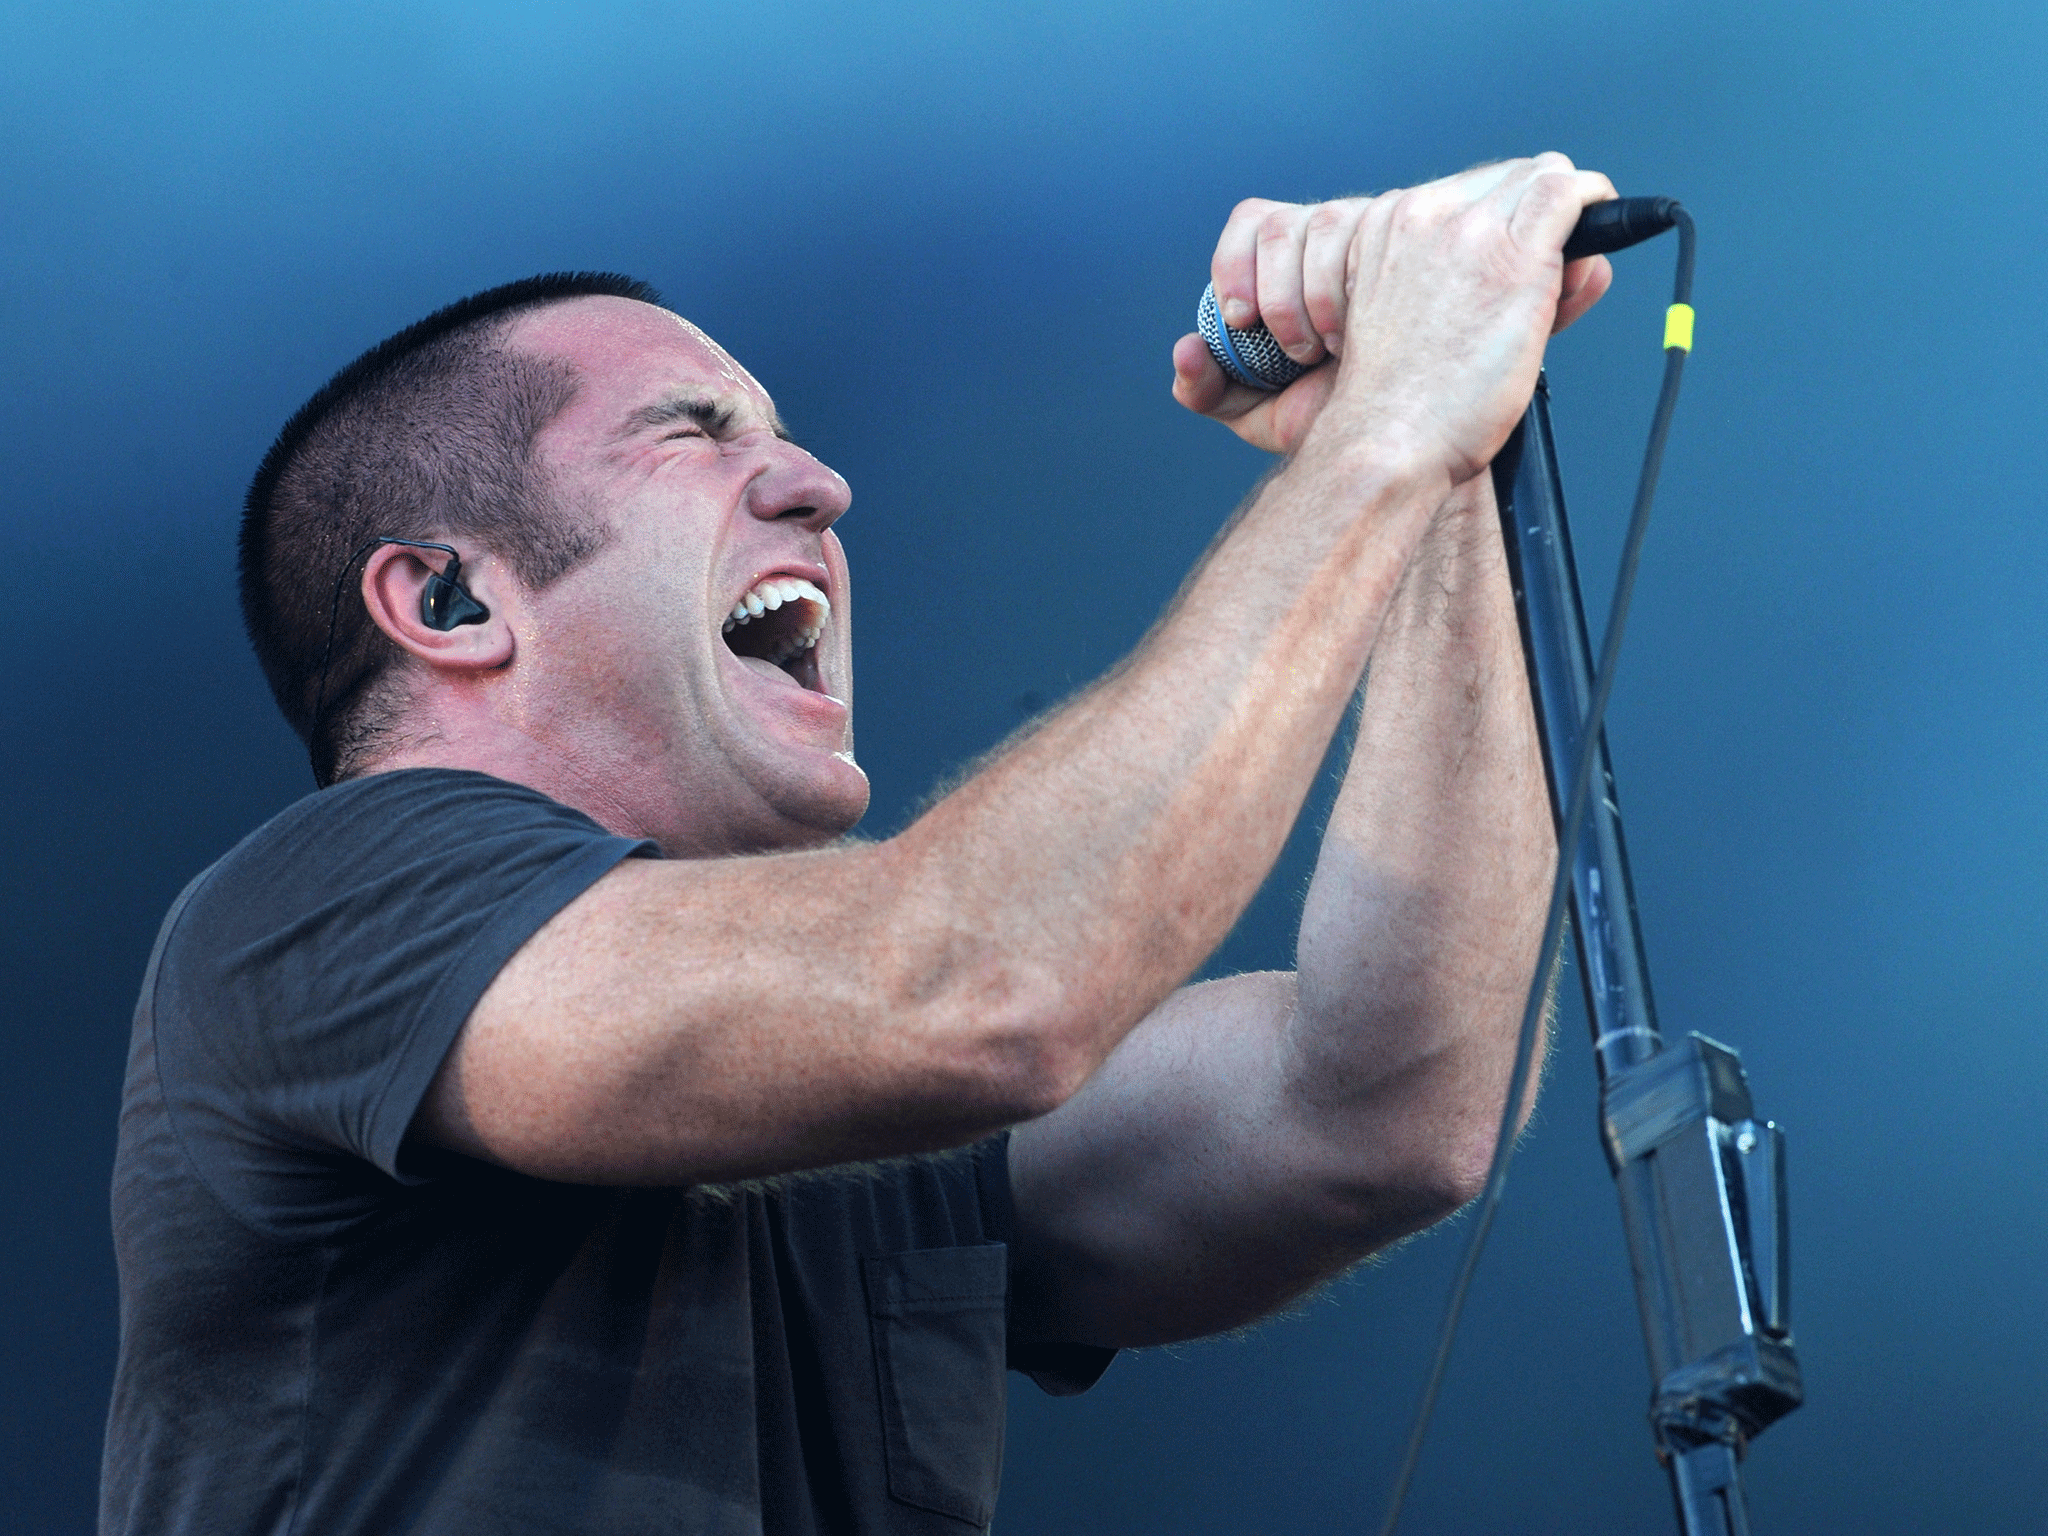 Trent Reznor of Nine Inch Nails, here seen performing at Sonisphere Festival in 2009